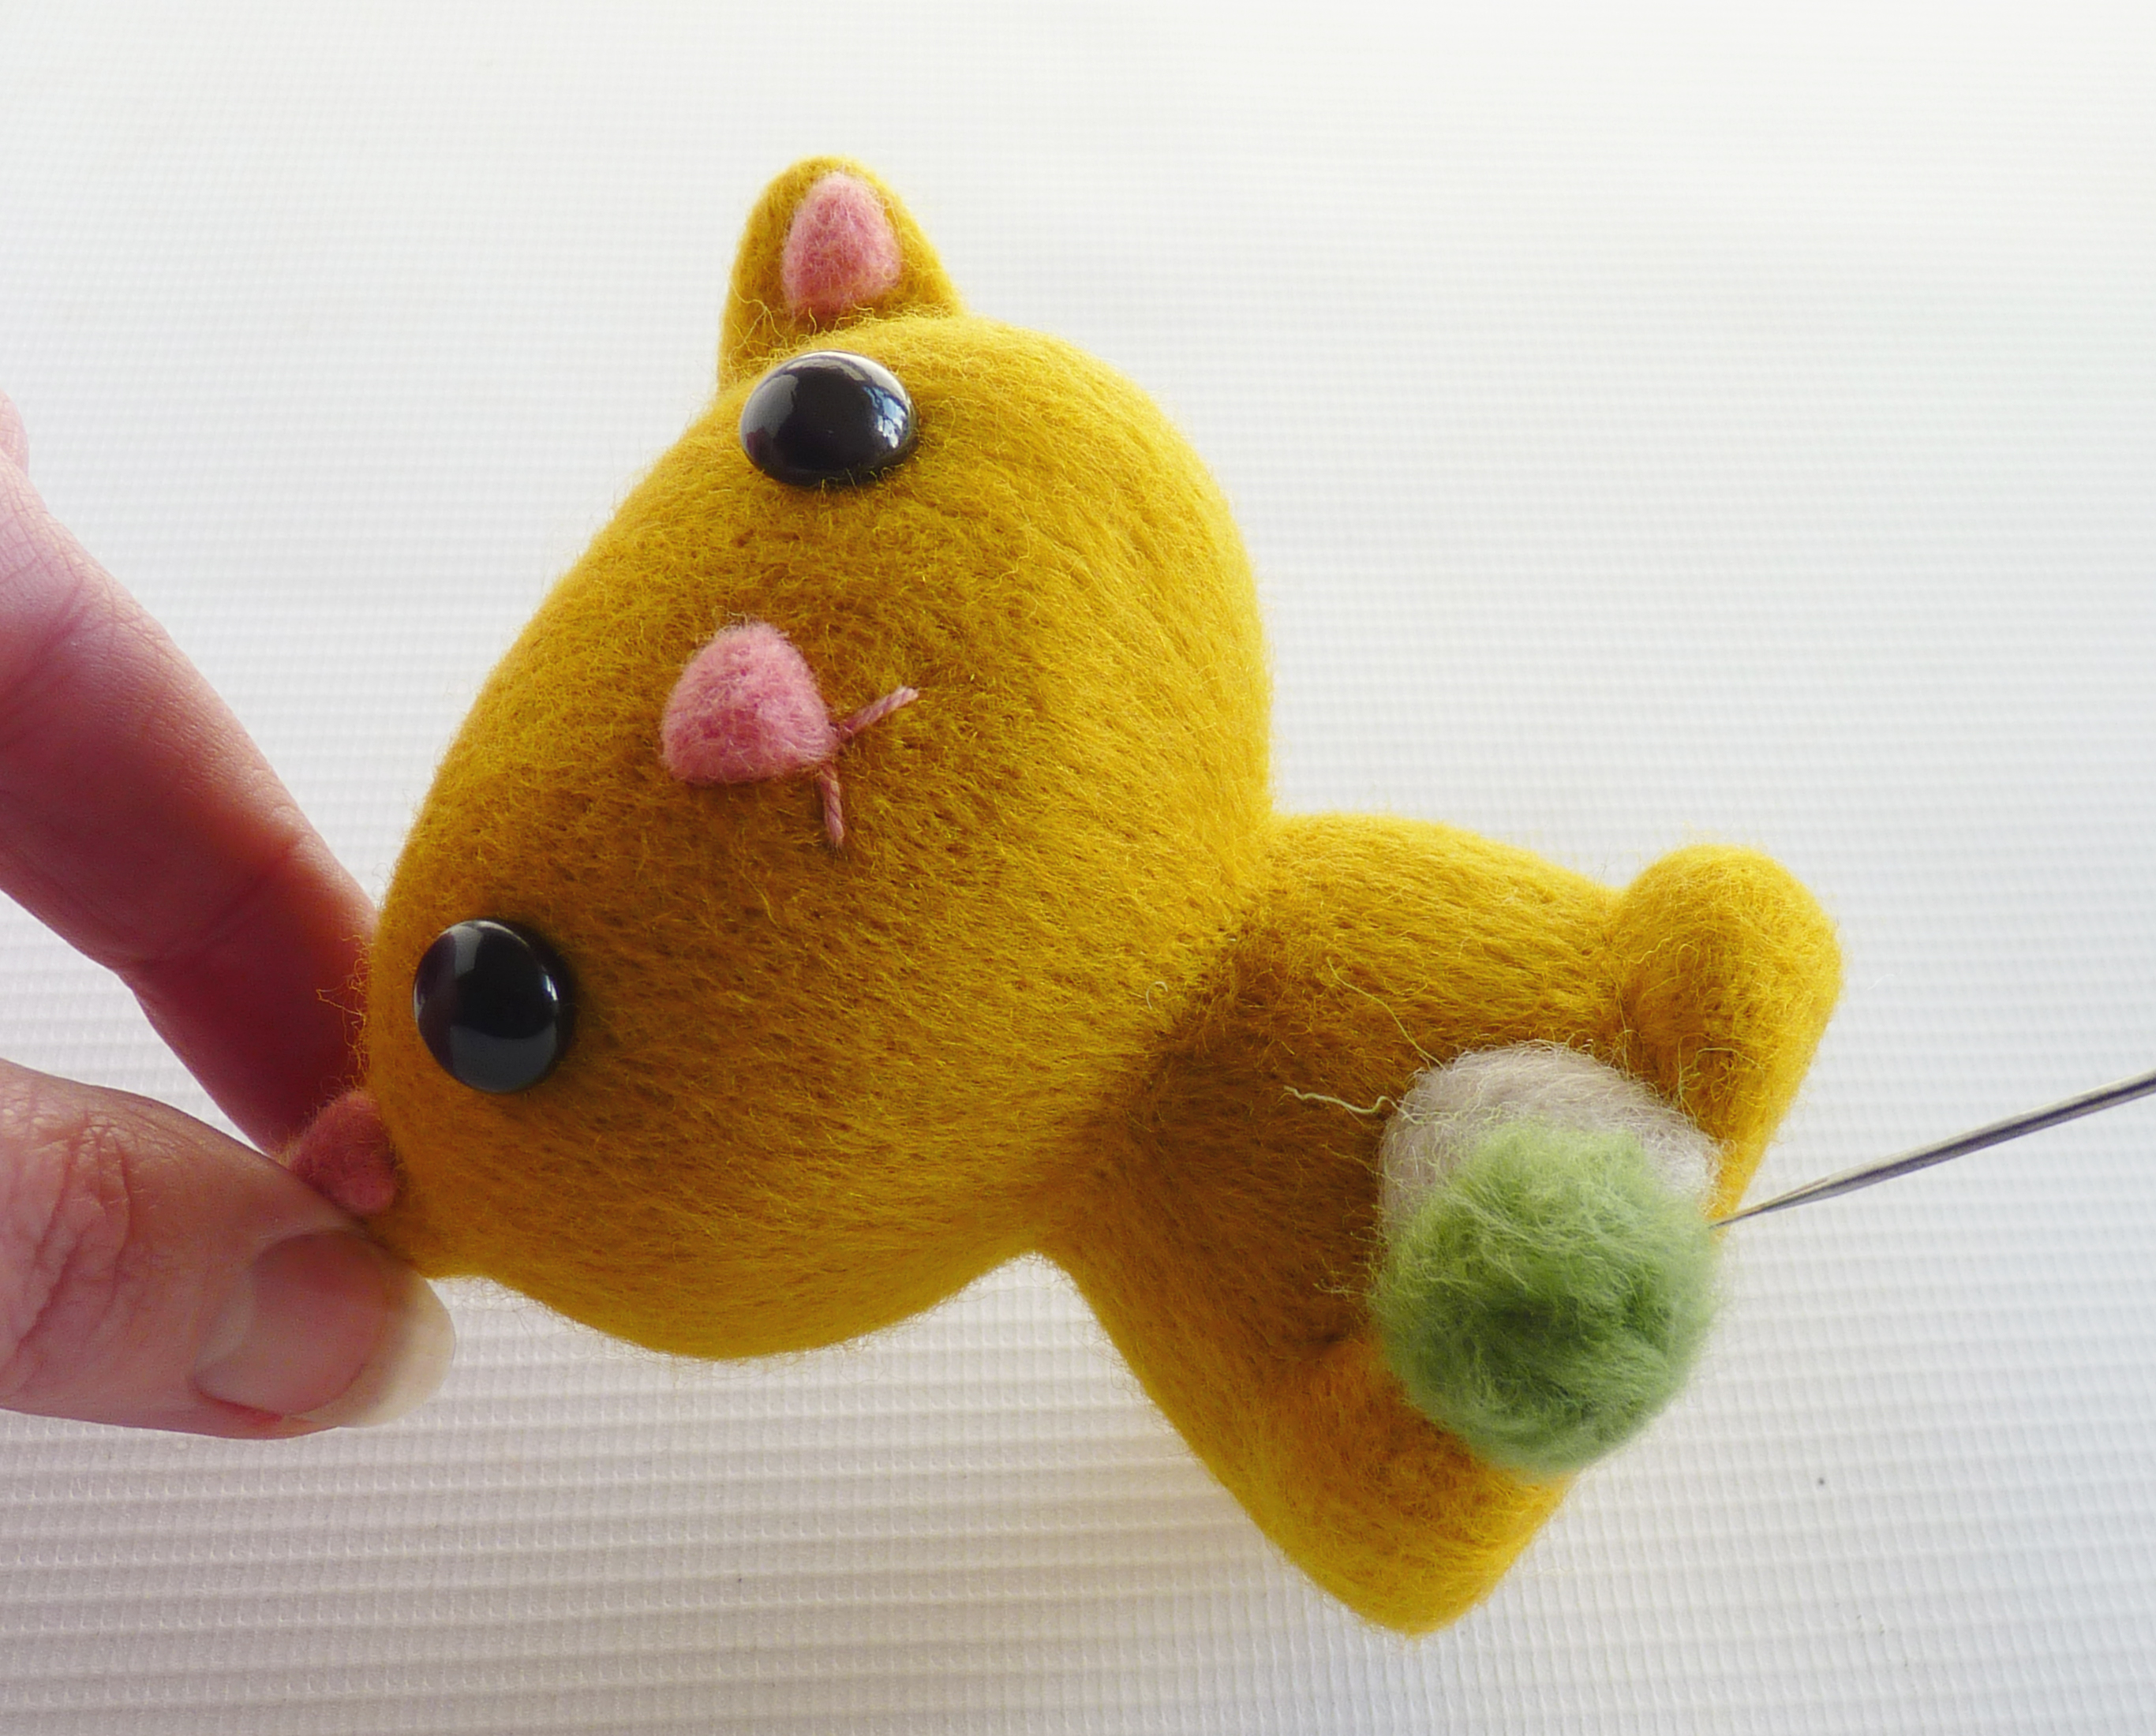 How to make needle felted animals - step 21